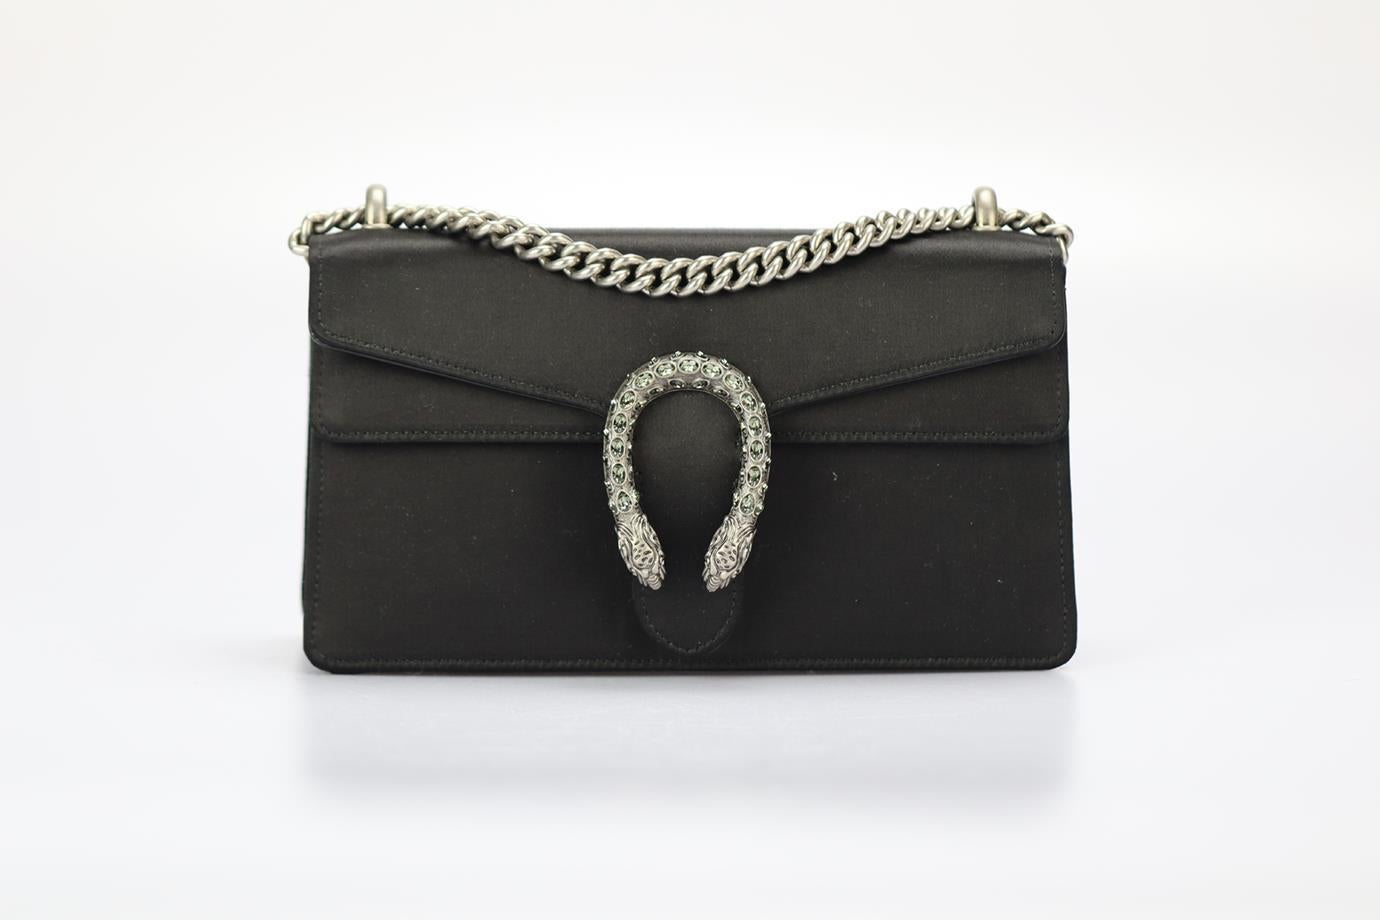 Gucci Dionysus Small Embellished Satin Shoulder Bag. Black. Clasp fastening - Front. Does not come with - dustbag or box. Height: 5.2 in. Width: 9.9 in. Depth: 2.8 in. Handle drop: 12.2 in. Strap drop: 22.8 in. Condition: Used. Very good condition -